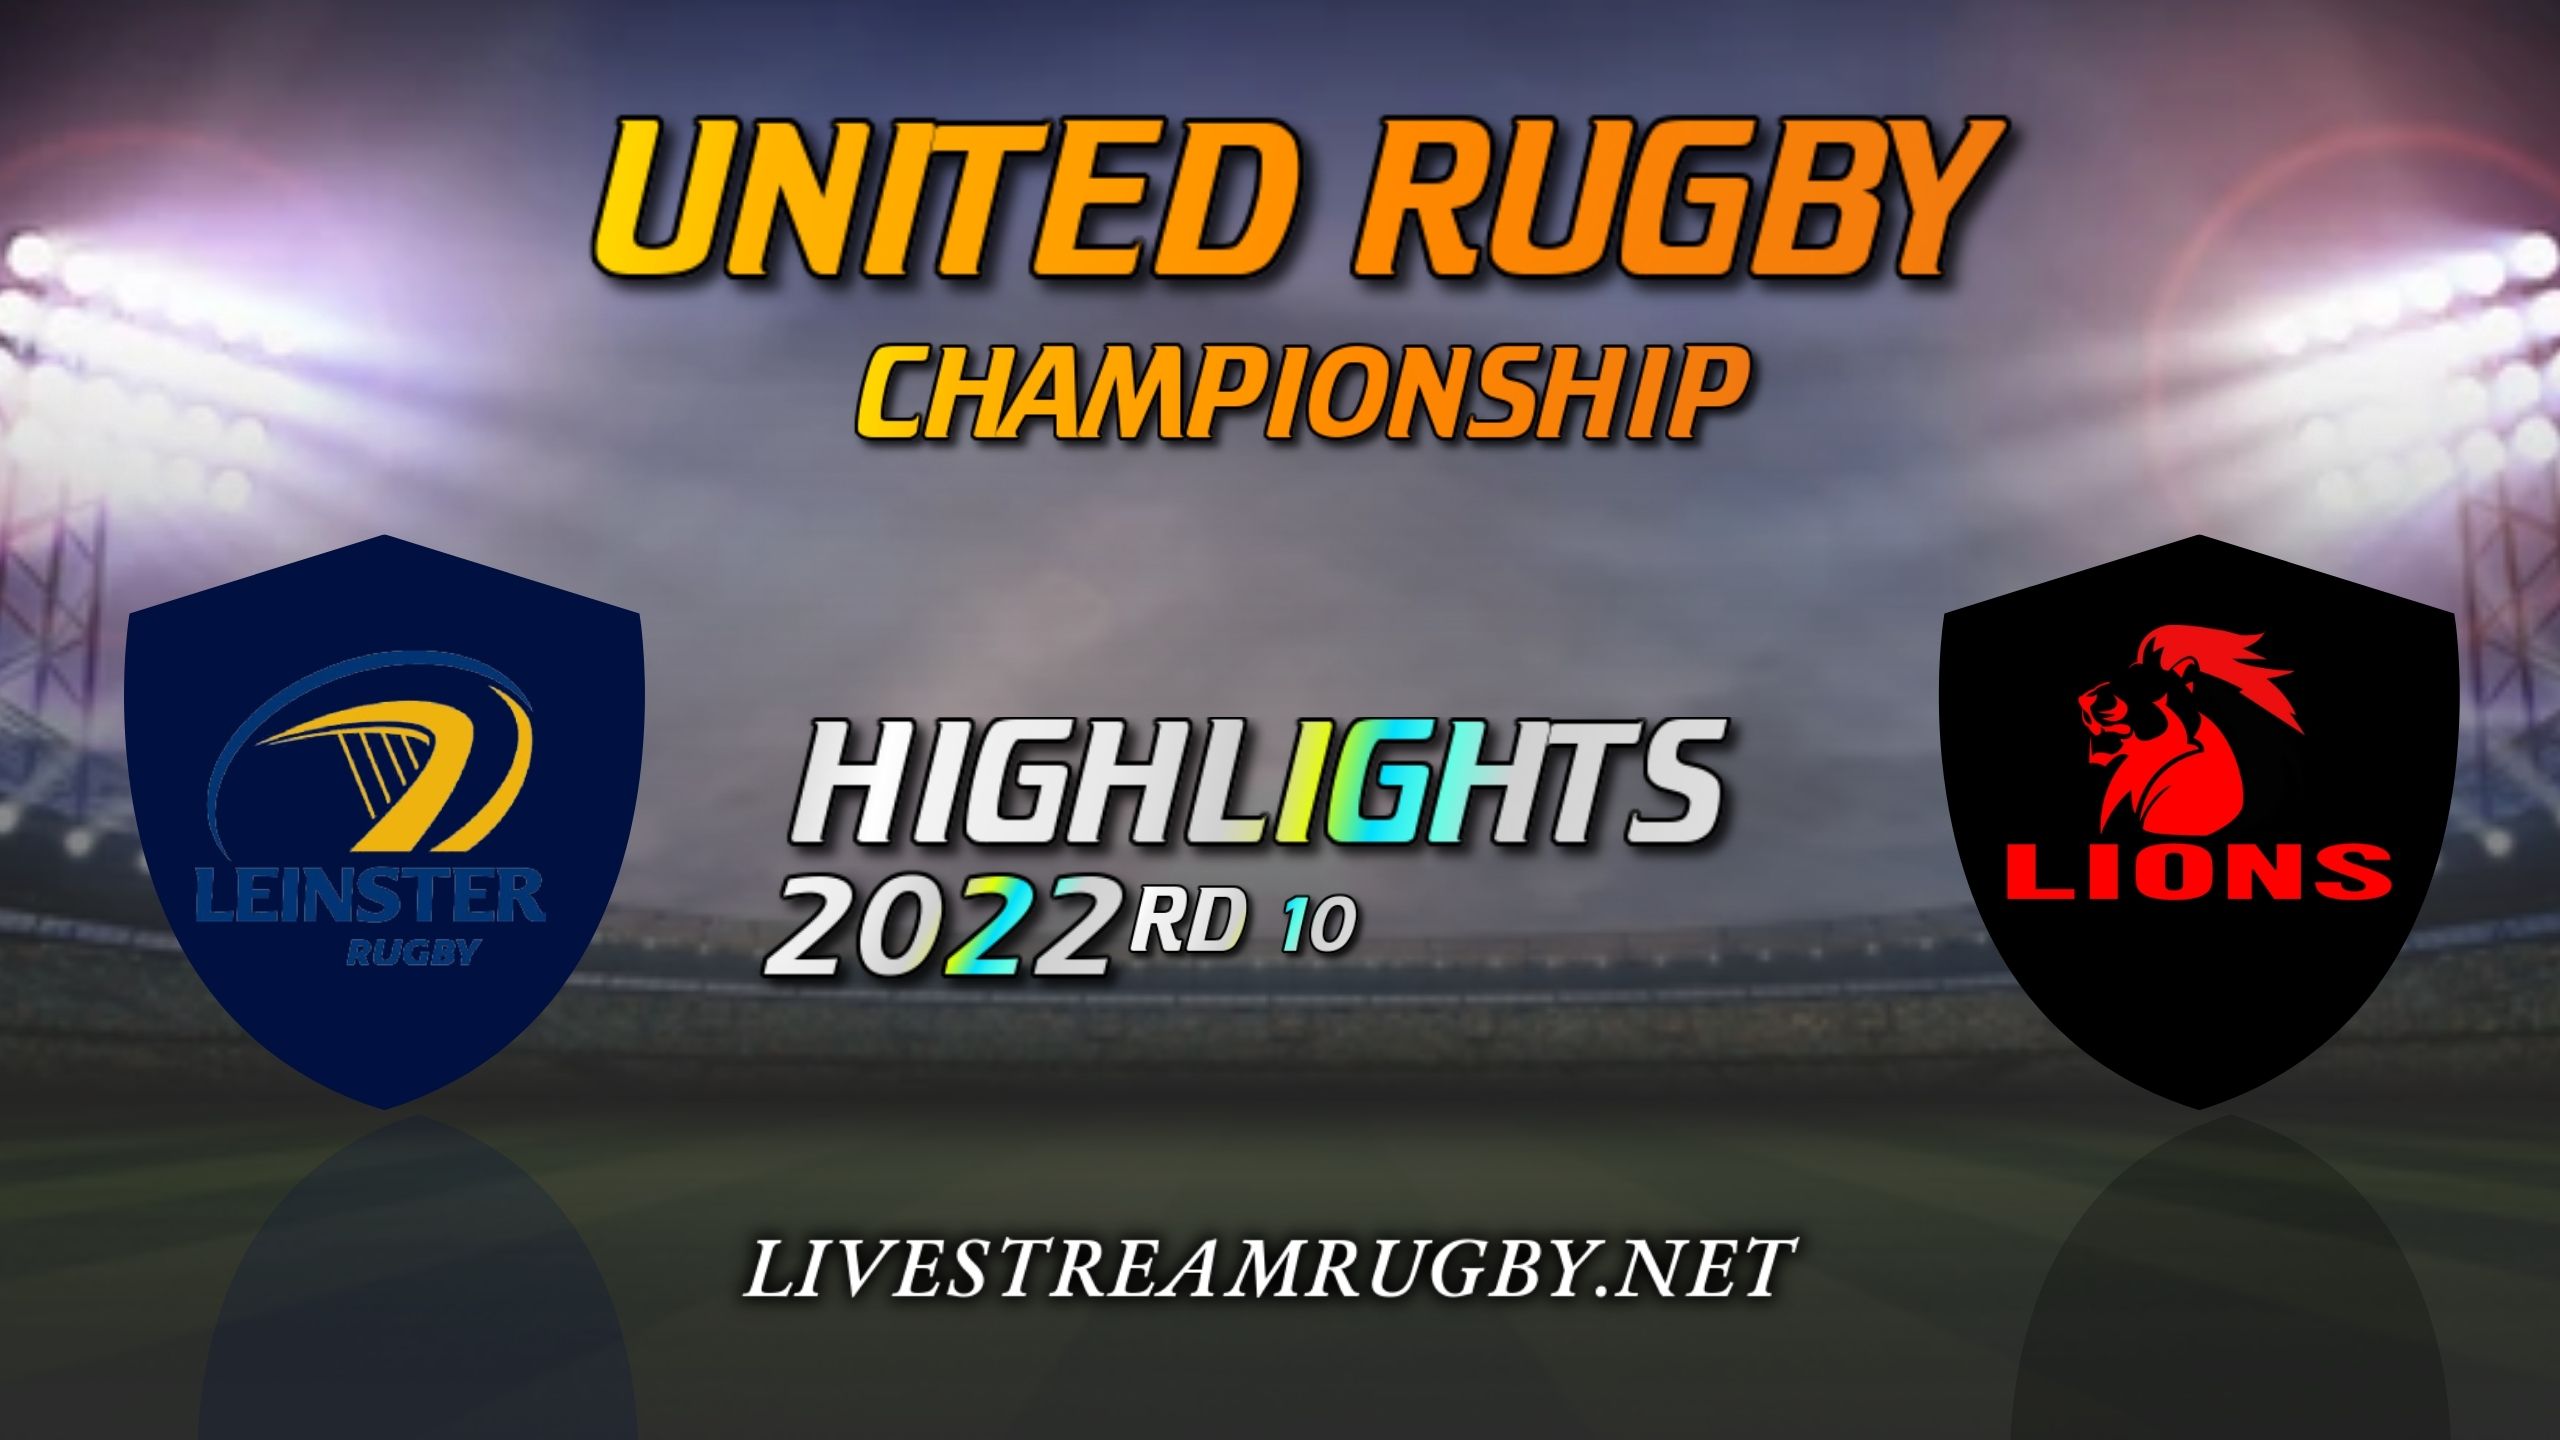 Leinster Vs Lions Highlights 2022 Rd 10 United Rugby